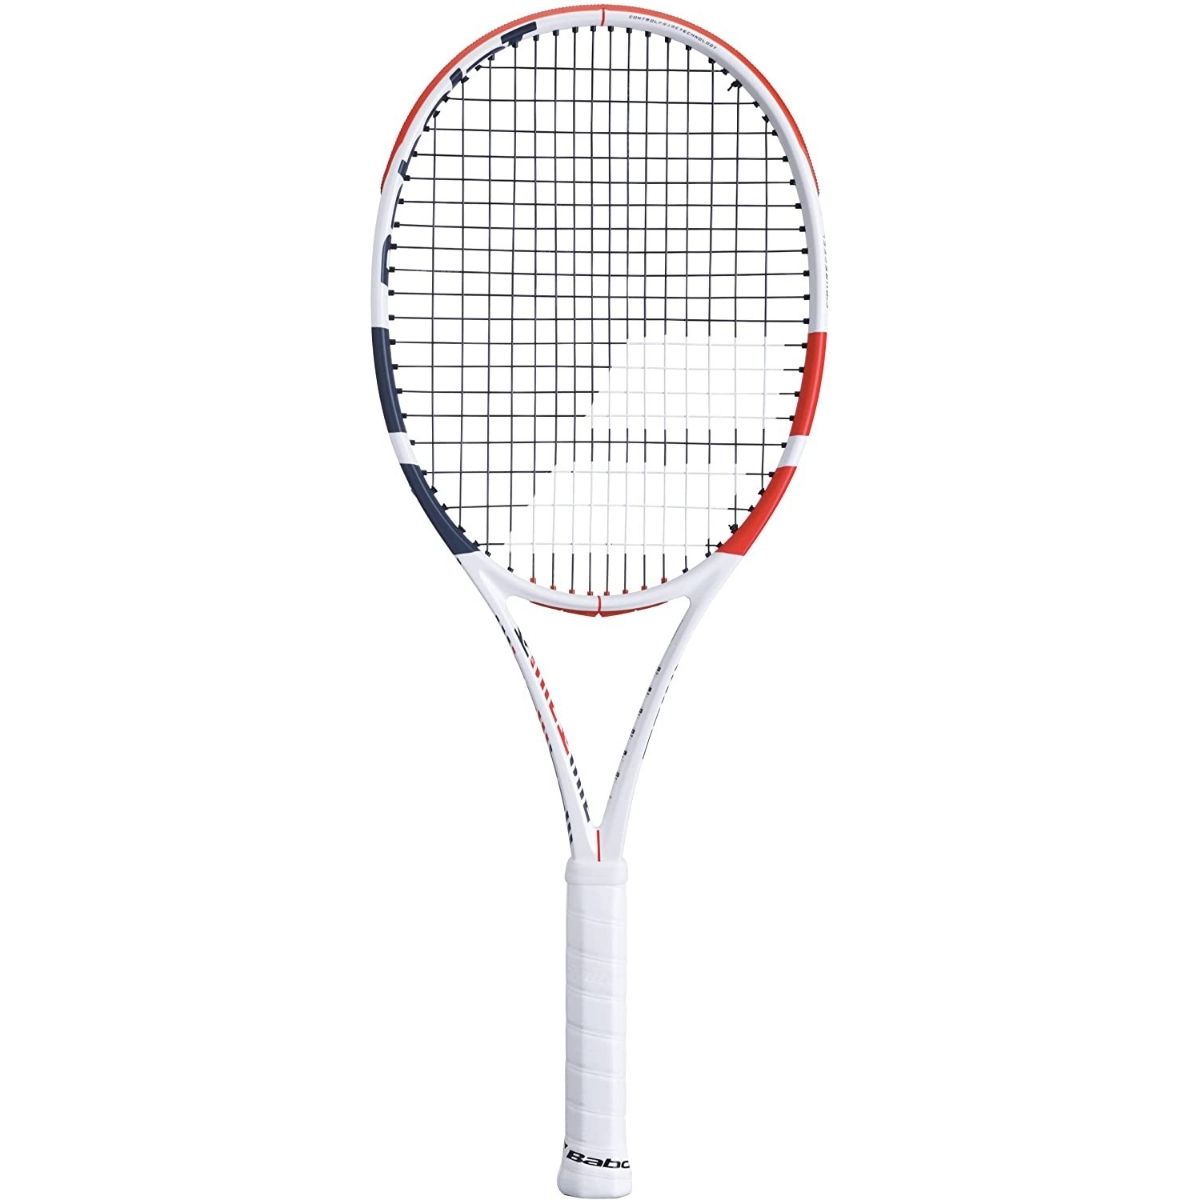 The Best Tennis Rackets for Intermediate Players Options: Babolat Pure Strike 100